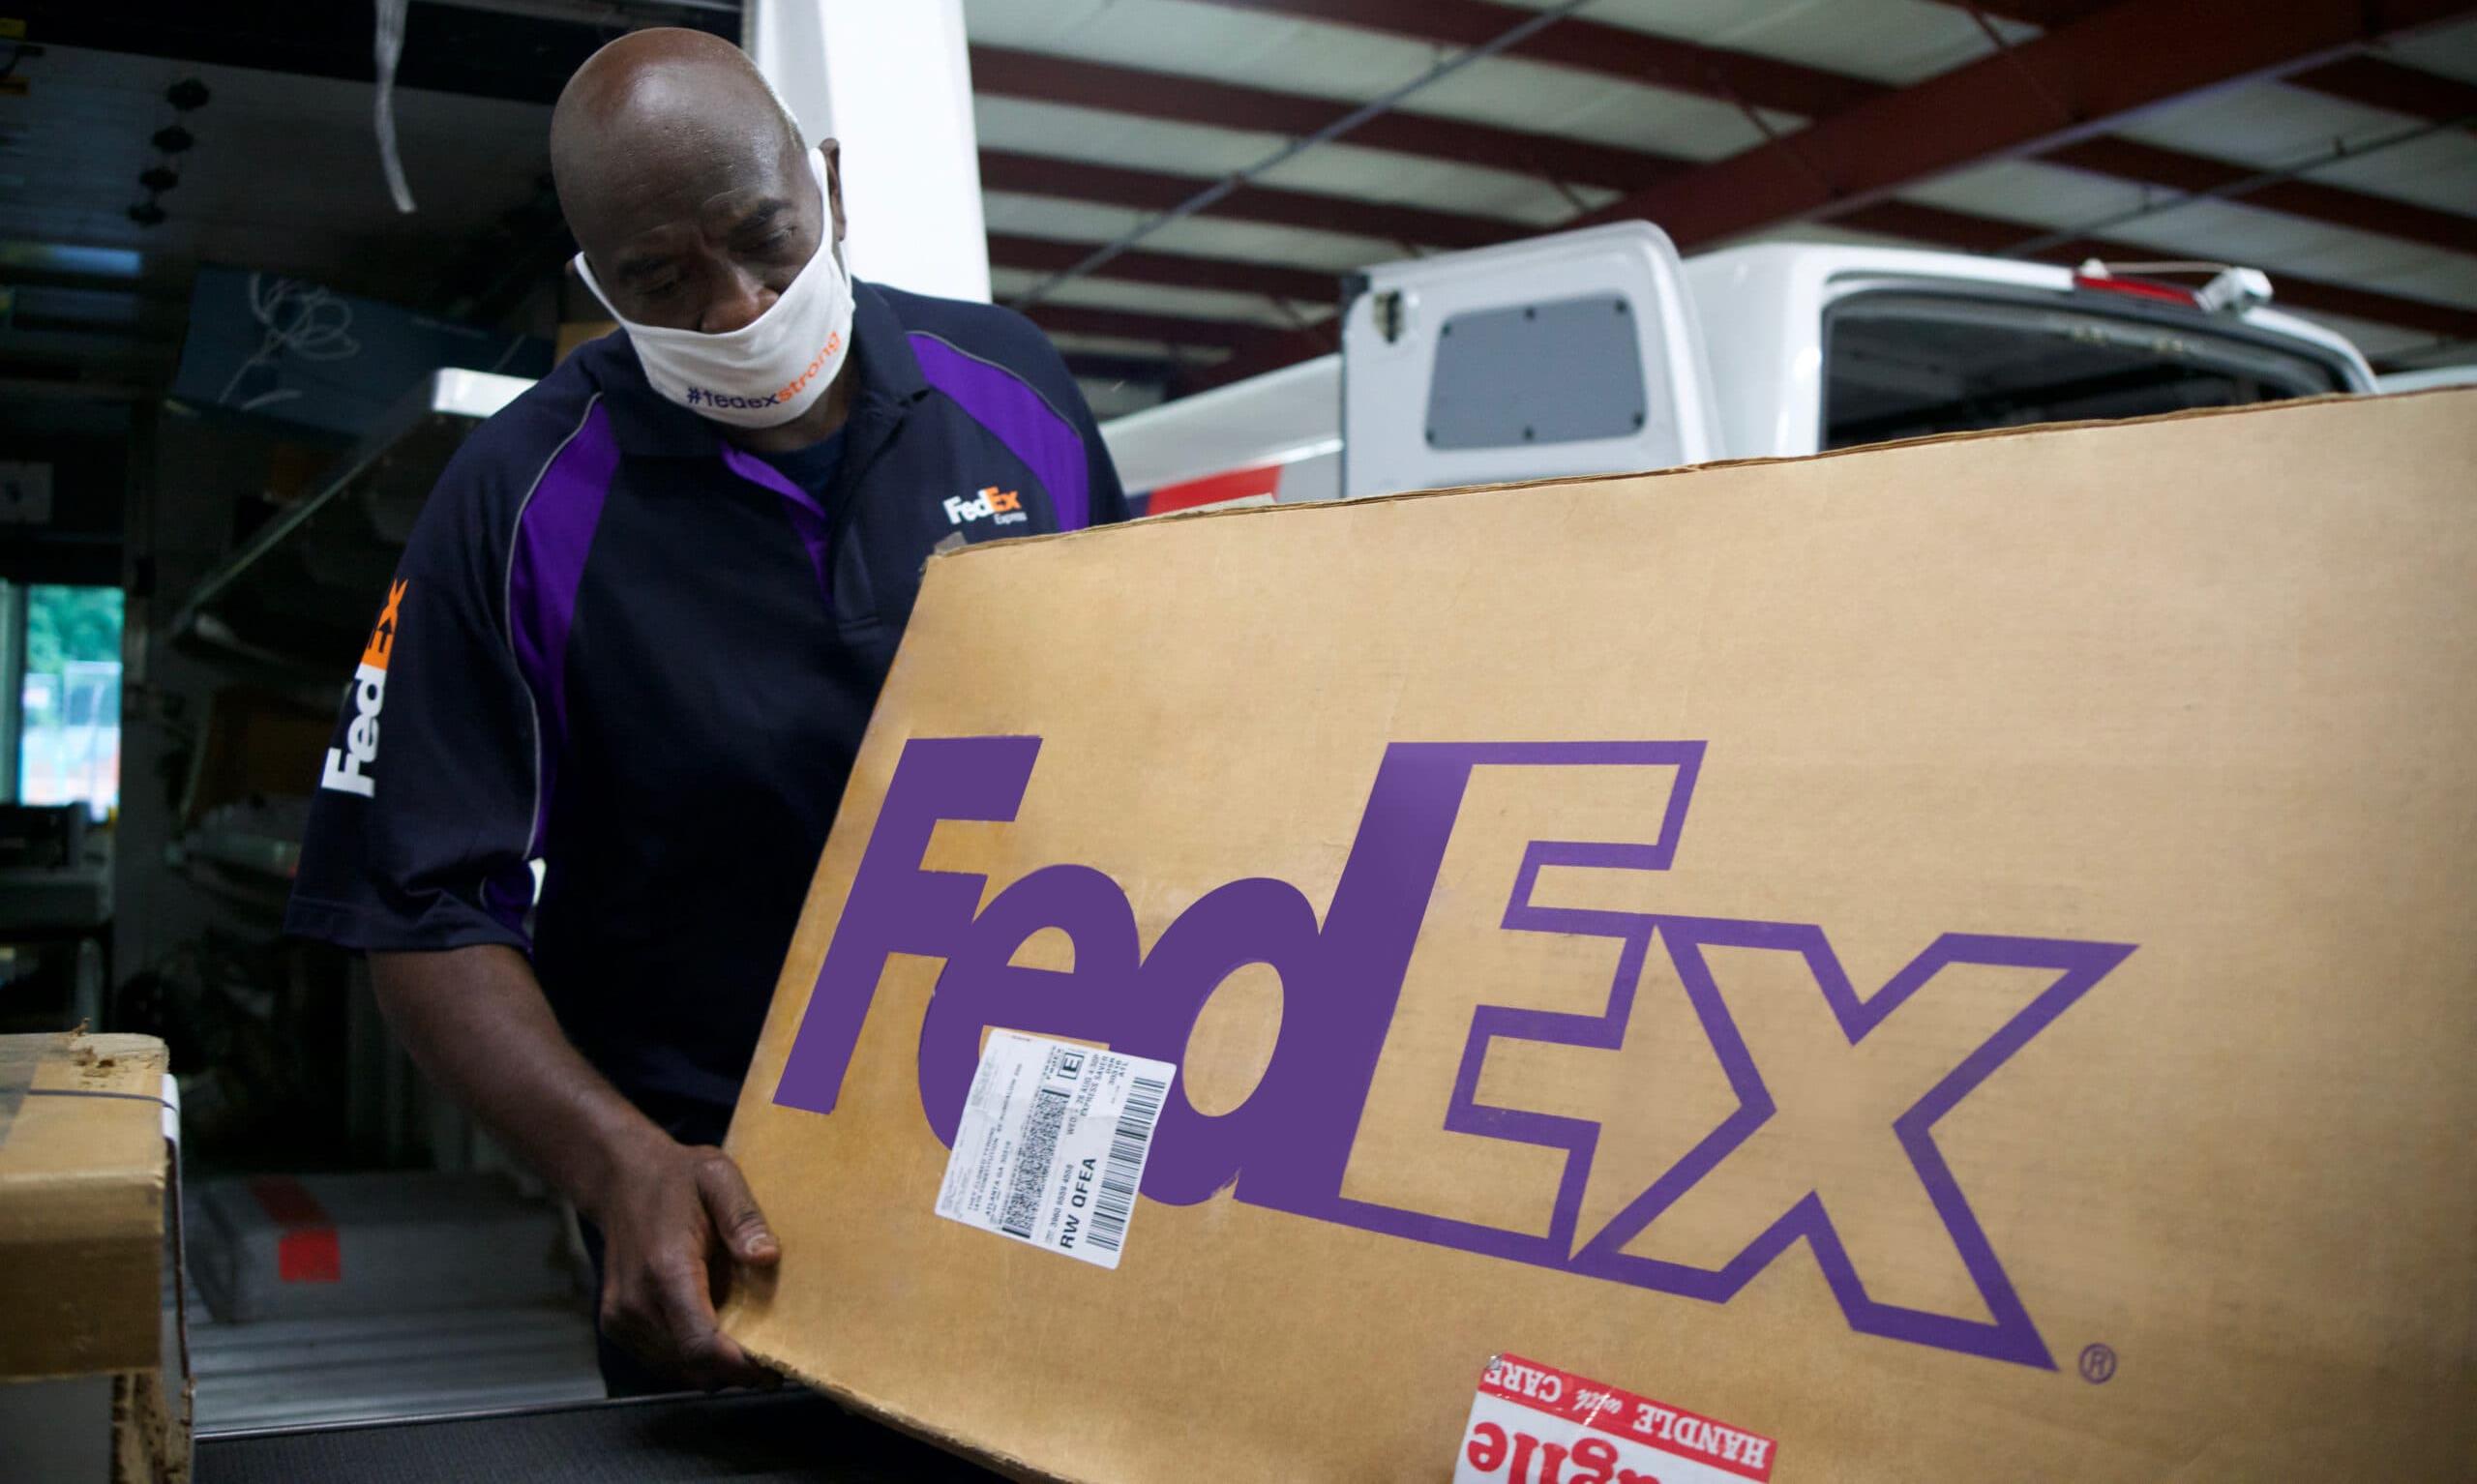 FedEx Q4 revenue at 21.9bn, ends fiscal 2023 with 90.2bn revenue